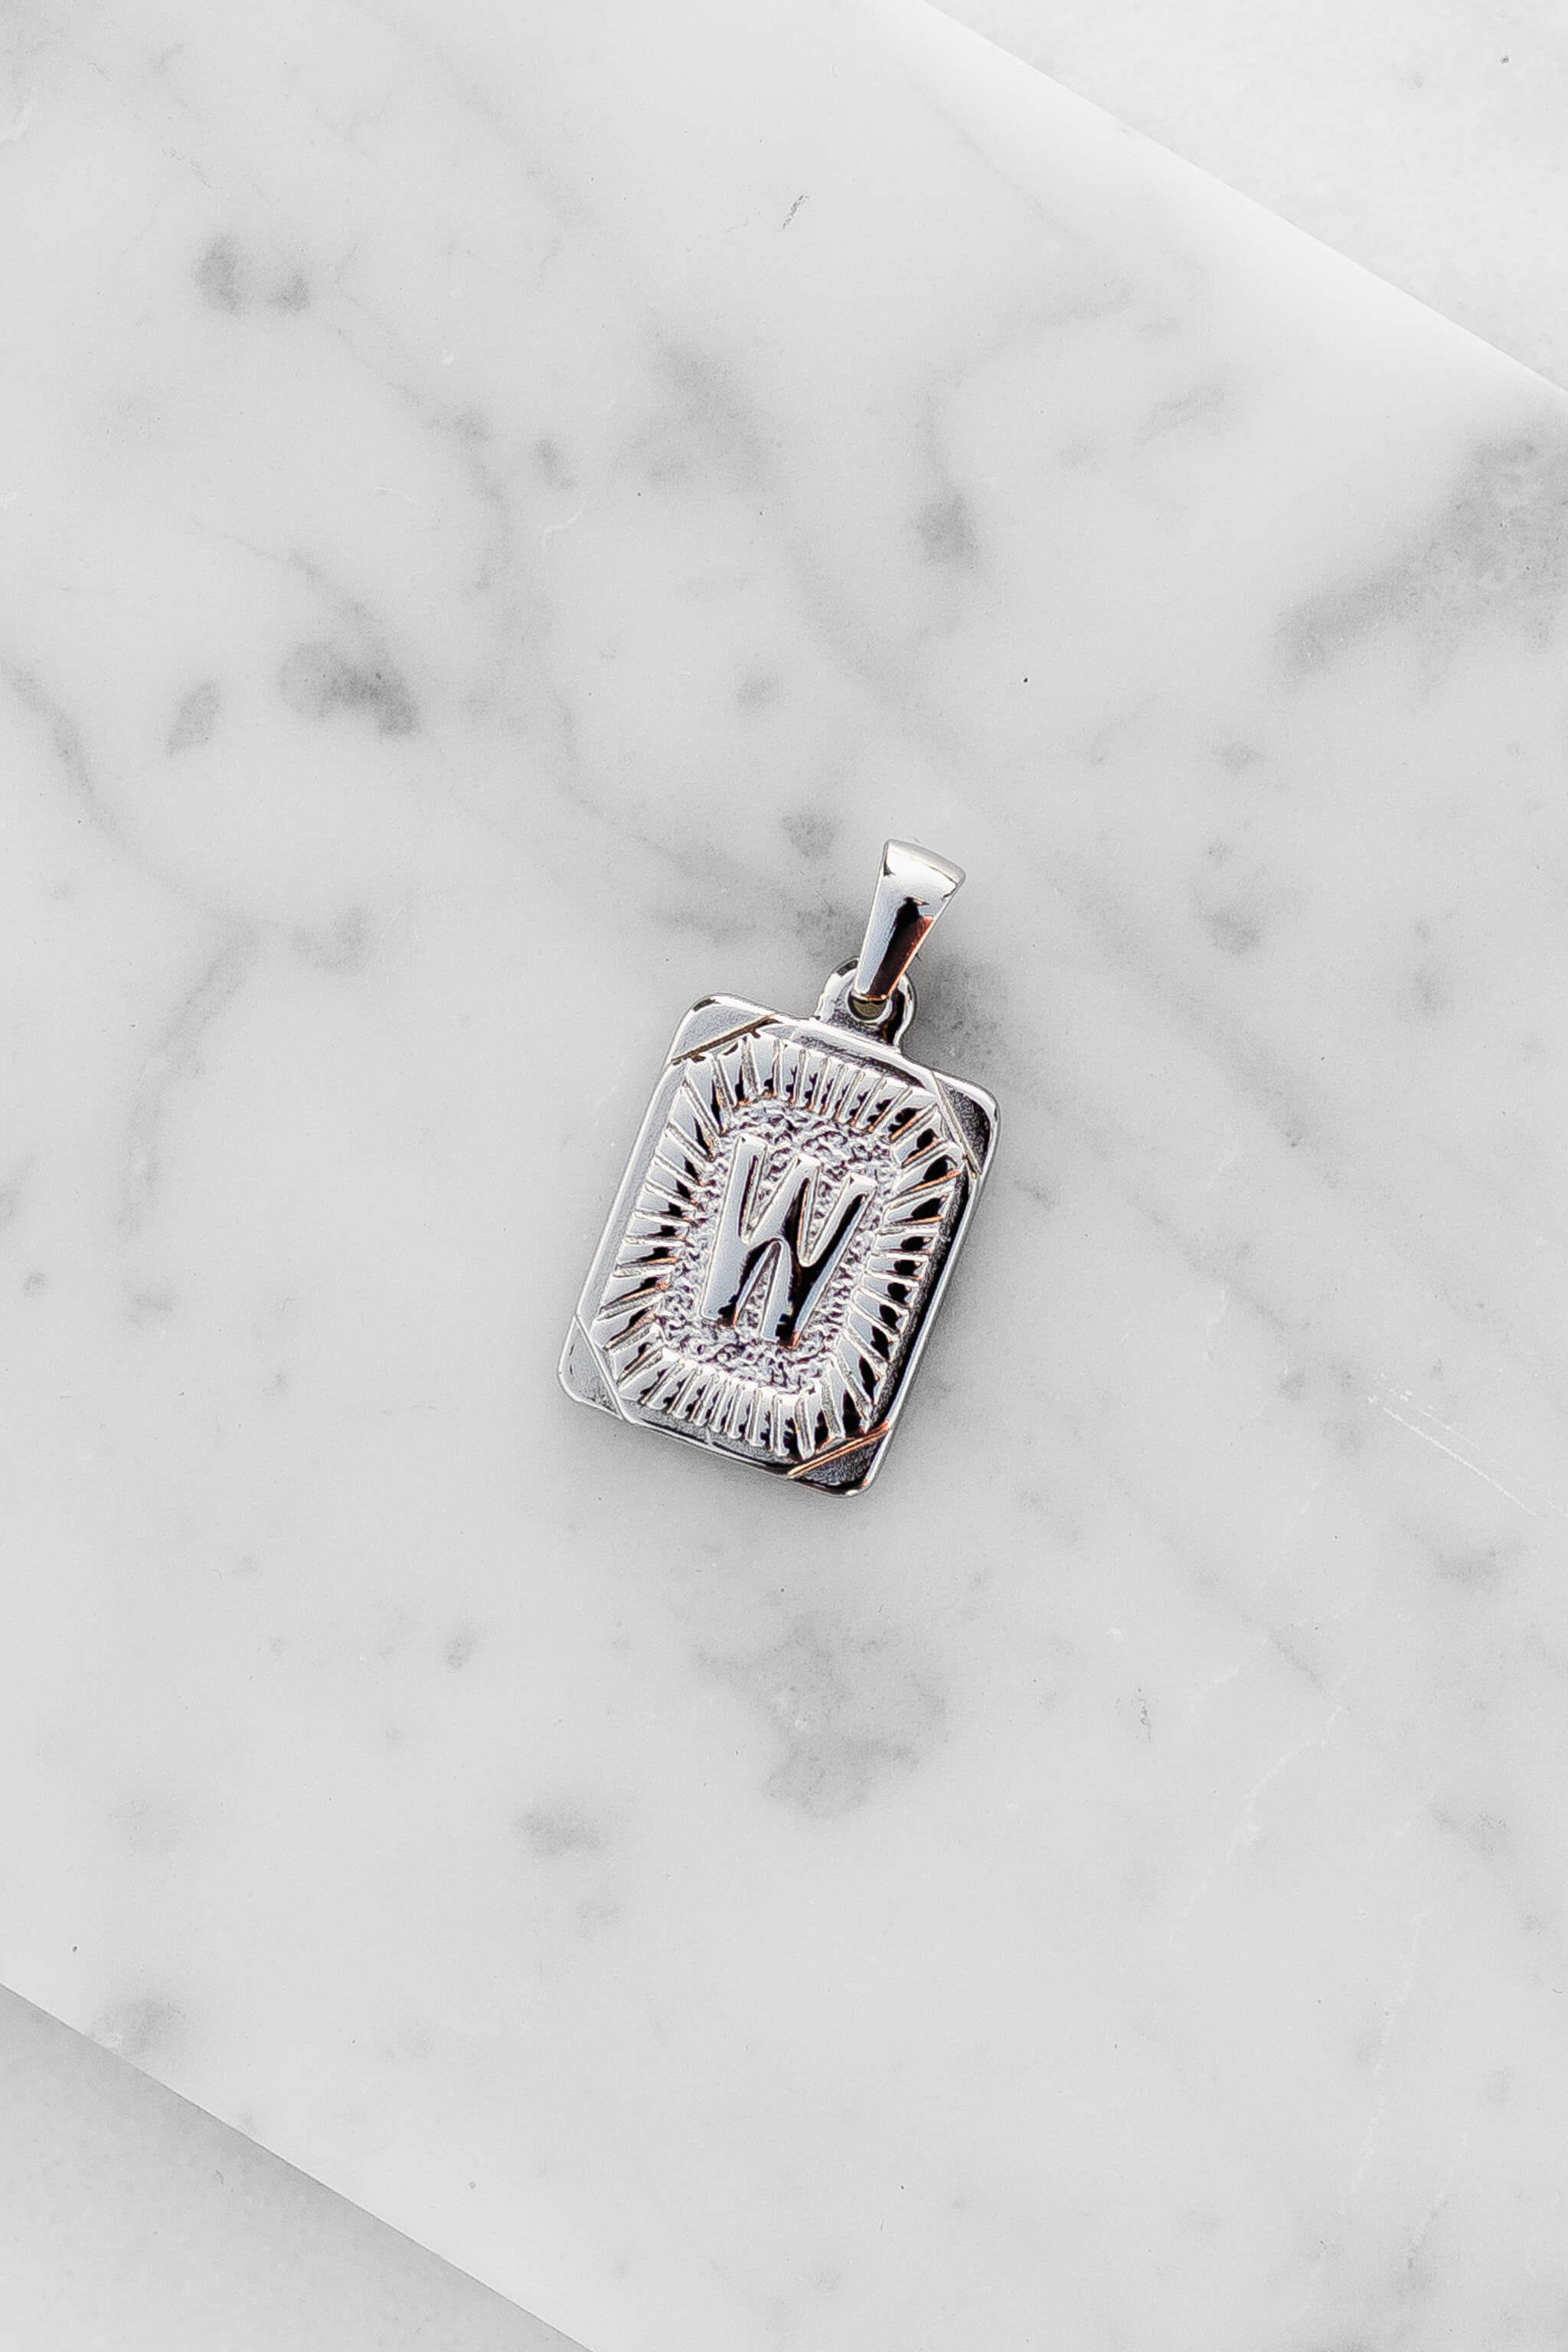 Silver Monogram Letter "W" Charm laying on a marble